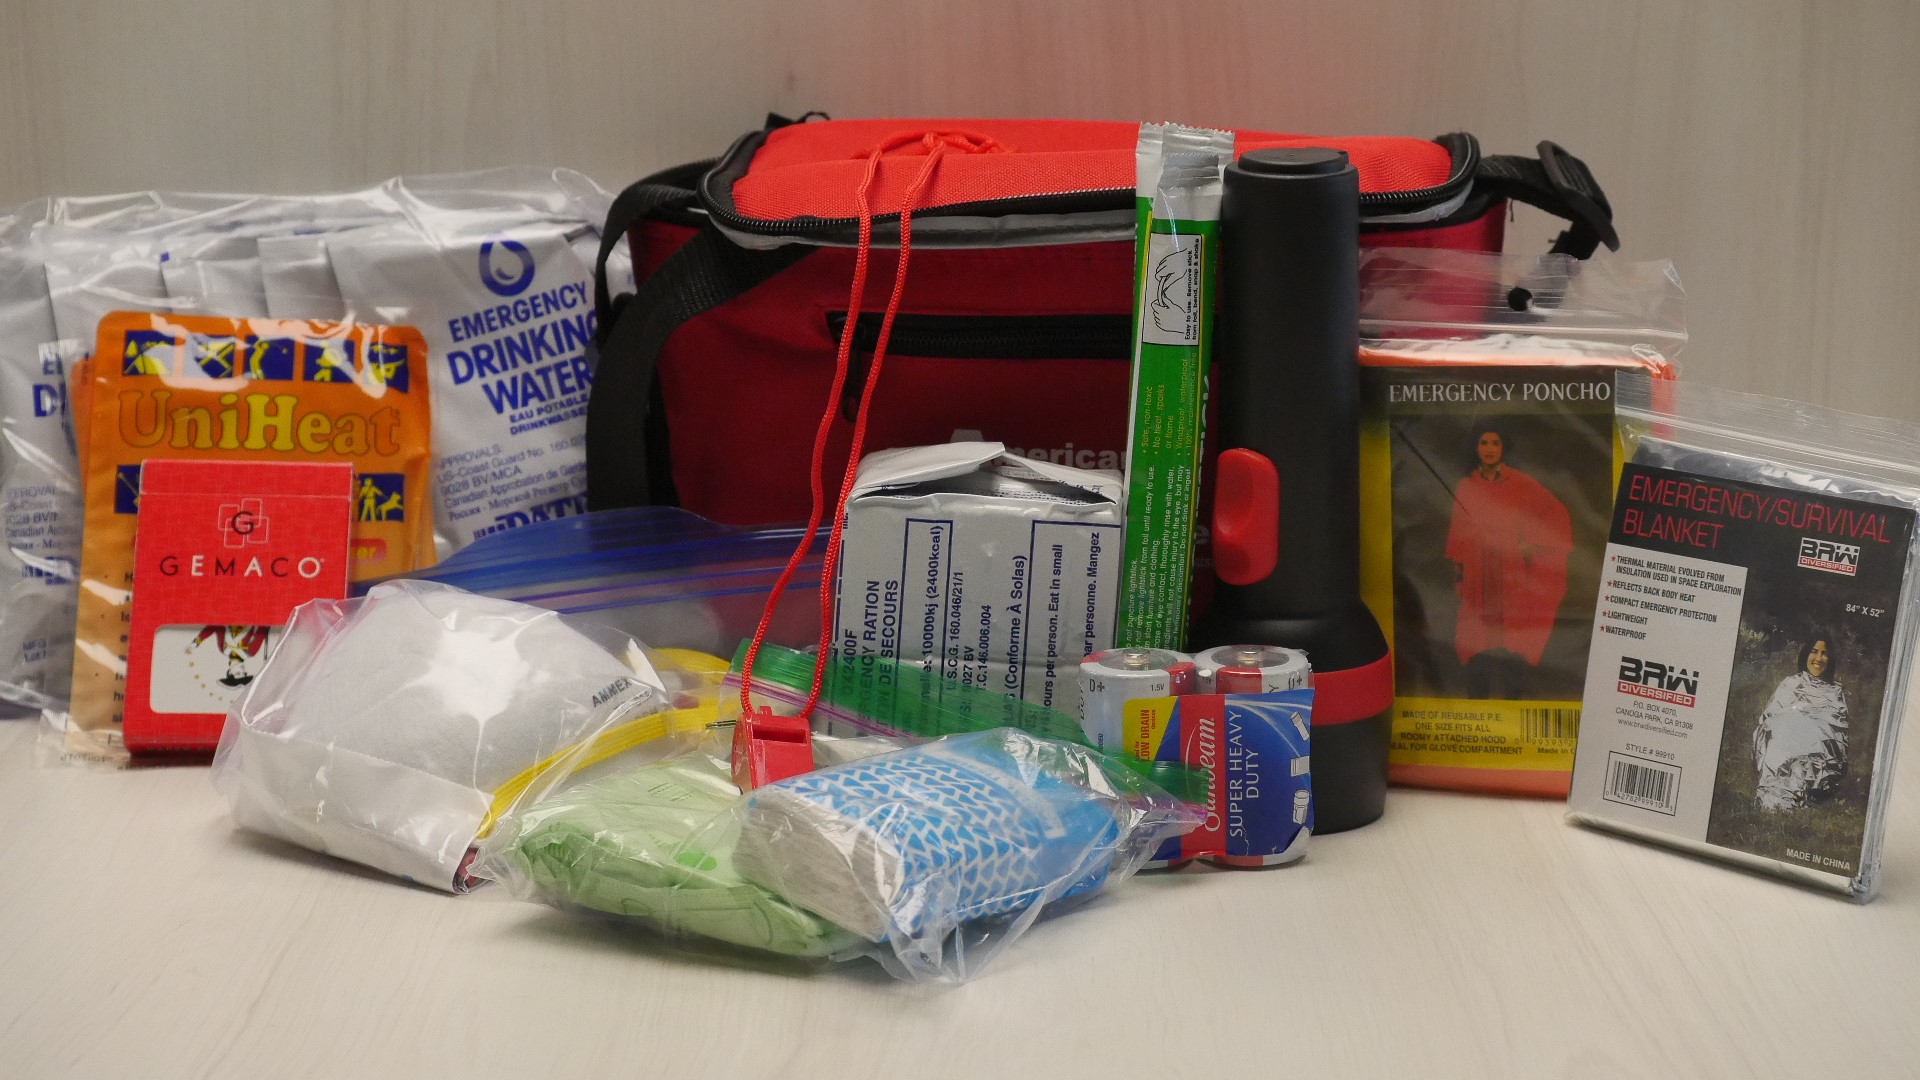 Seattle's Office of Emergency Management shares pointers on how to make sure you and your family stay safe if disaster strikes, and what supplies to have on hand.